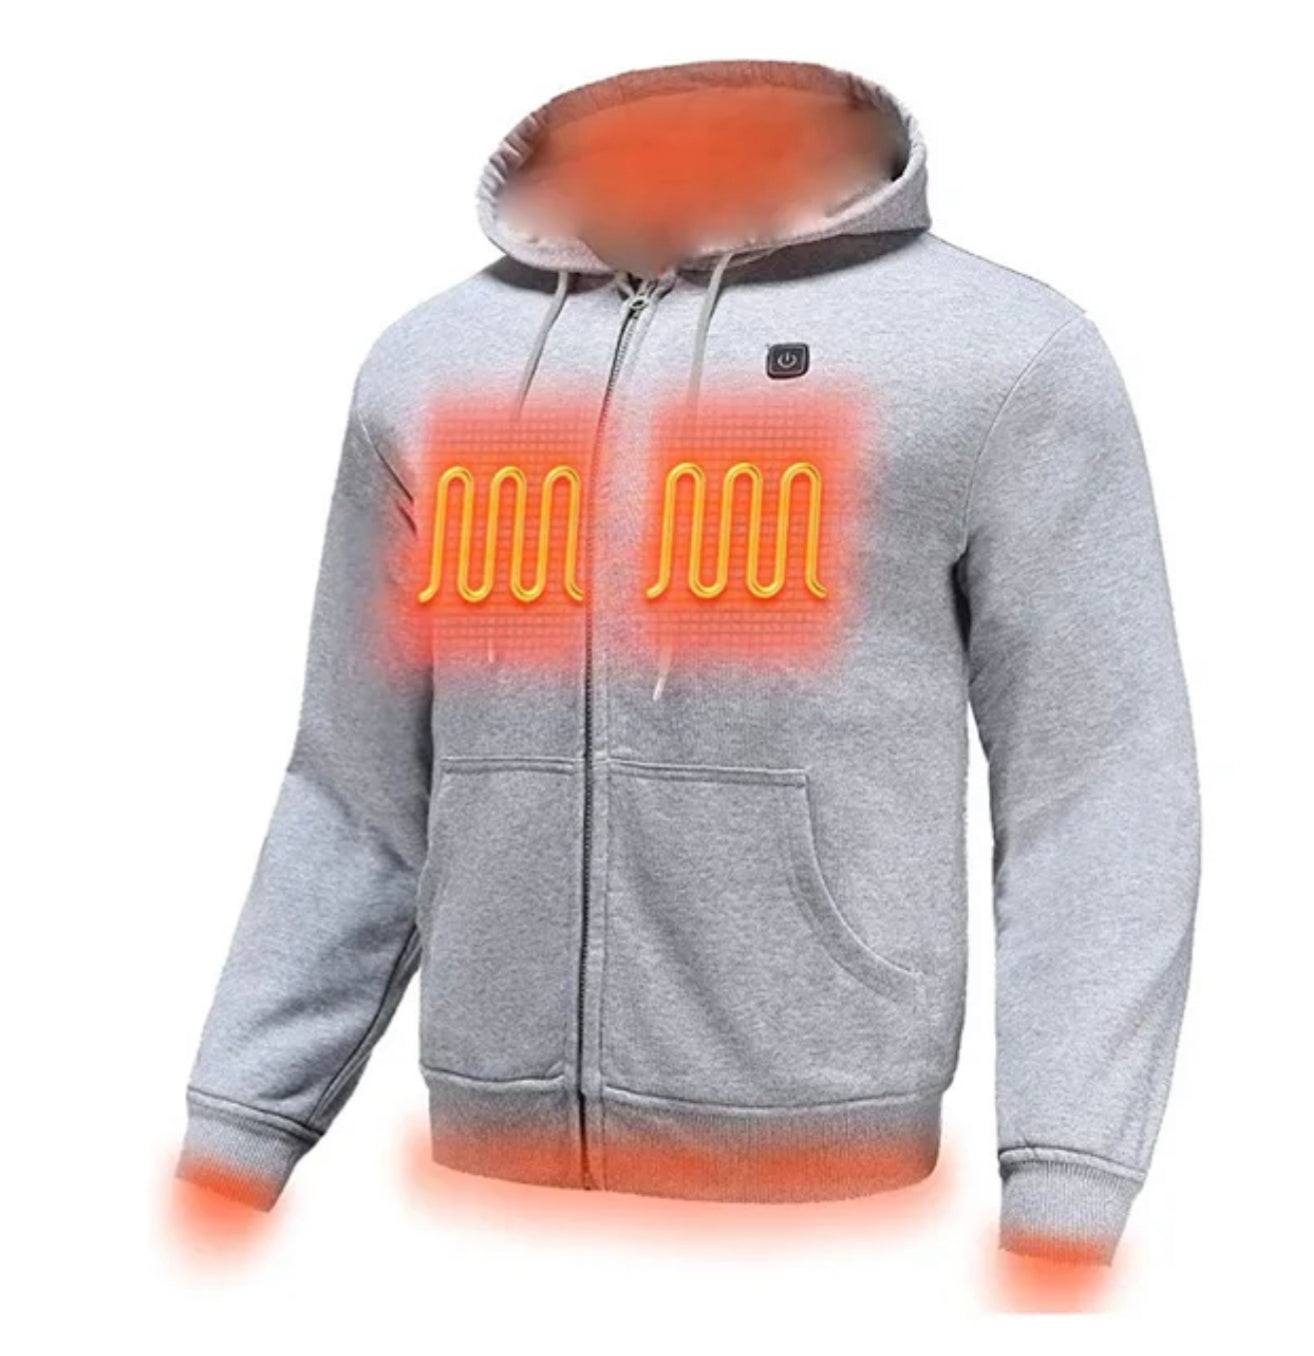 Cotton warm per: heated zip hoodie made of 100% cotton